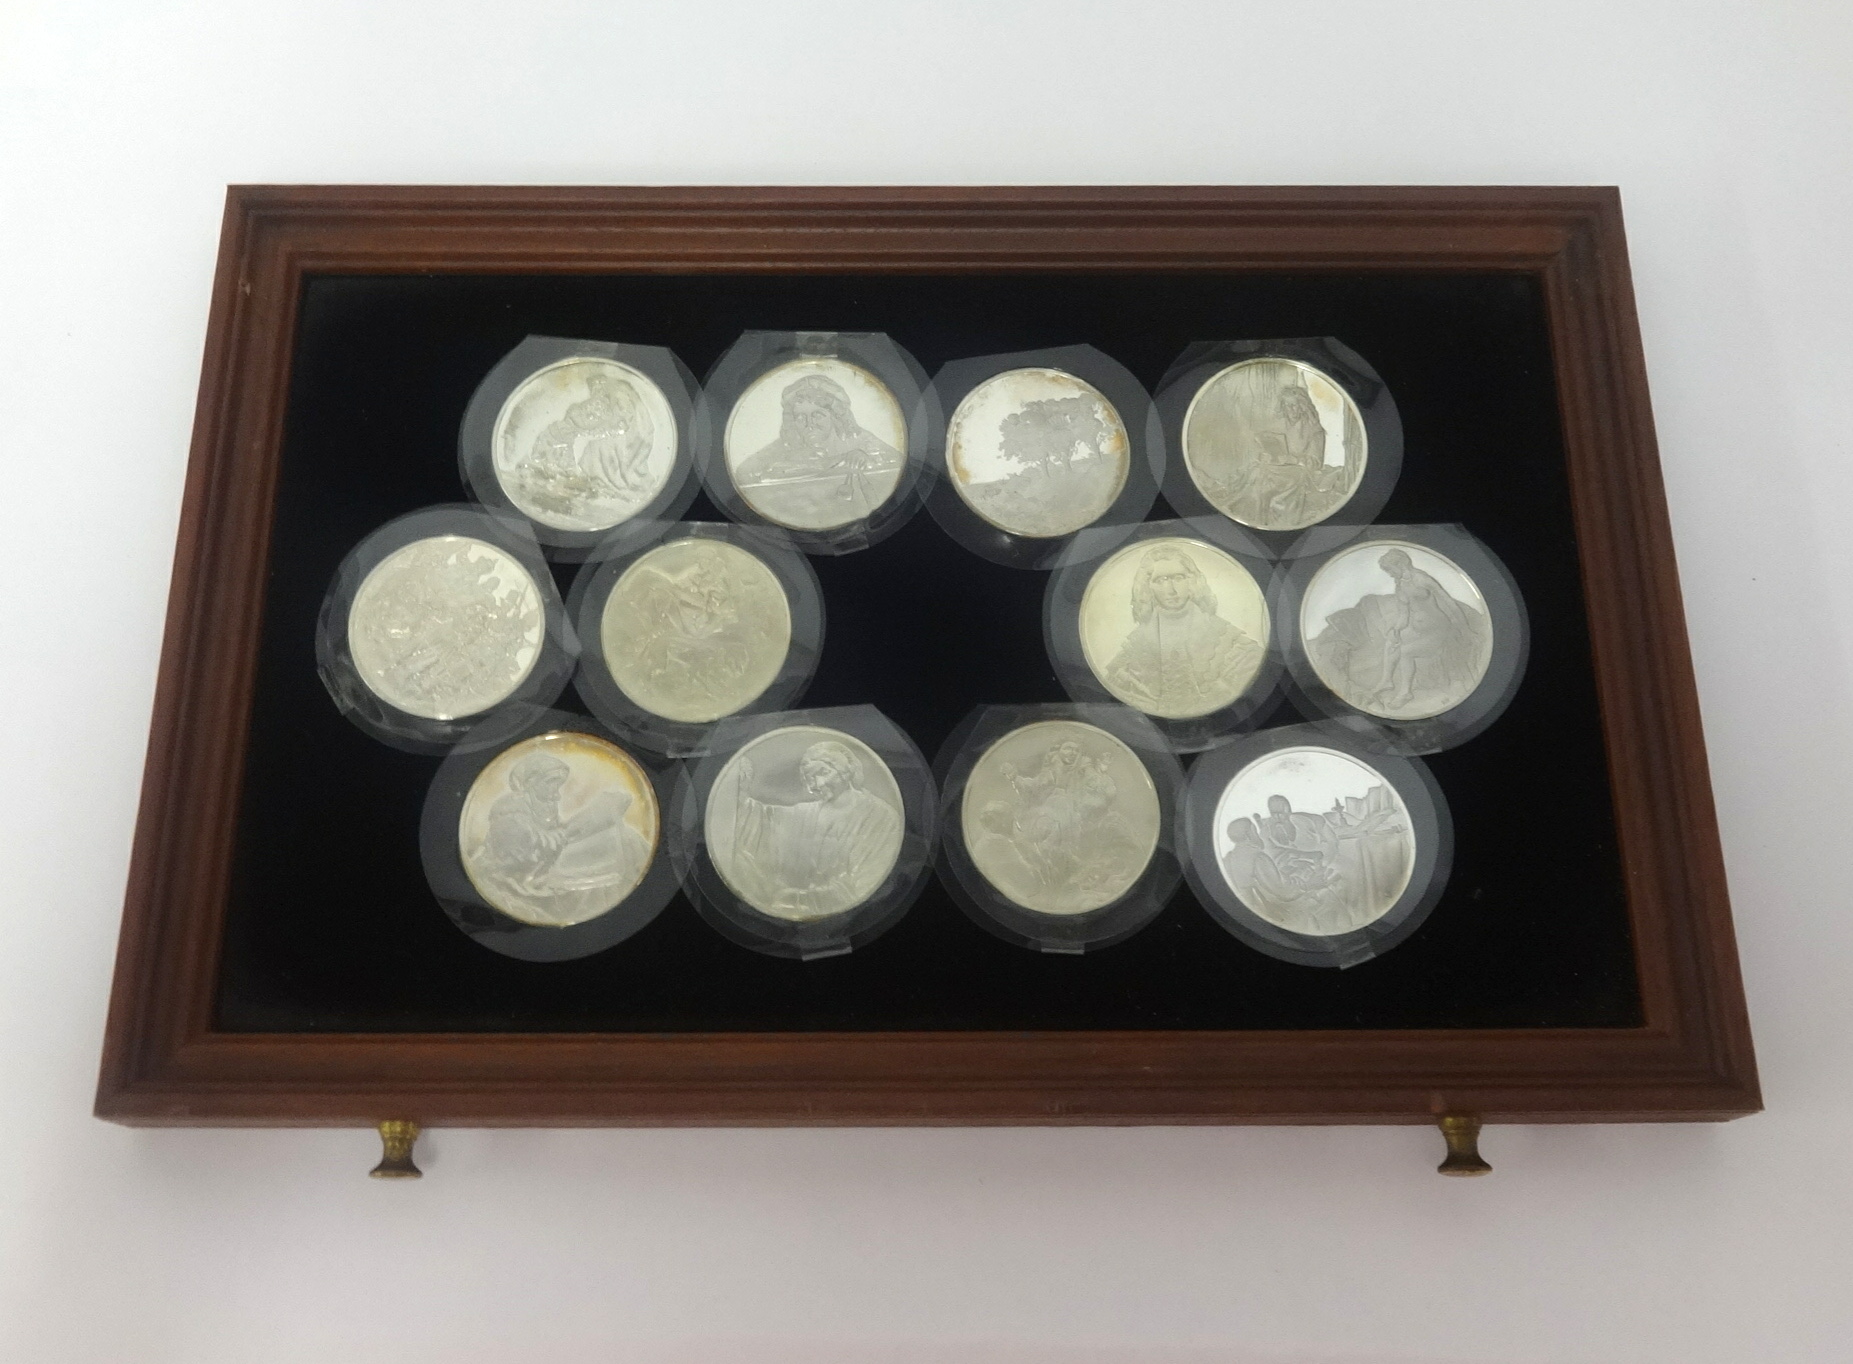 A collection of Sterling silver proof medals 'The Genius of Rembrandt' produced by John Pinches, - Image 4 of 4